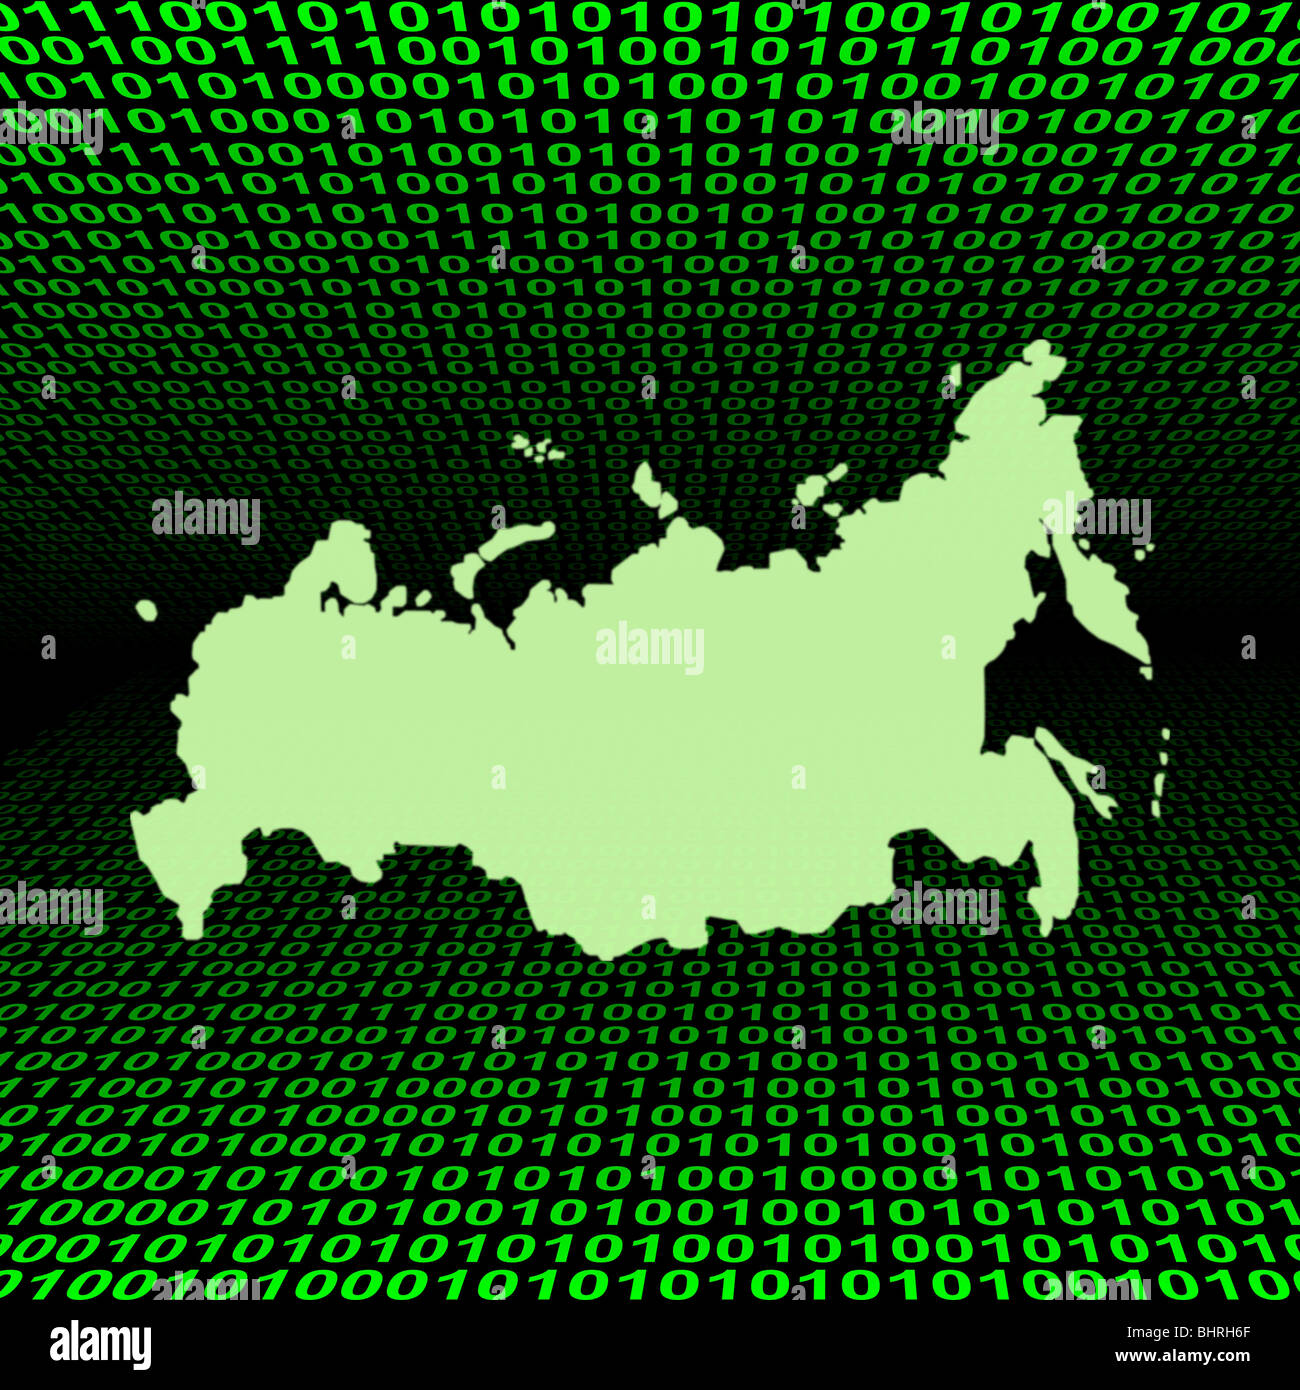 glowing Russian Federation map over green binary code illustration Stock Photo